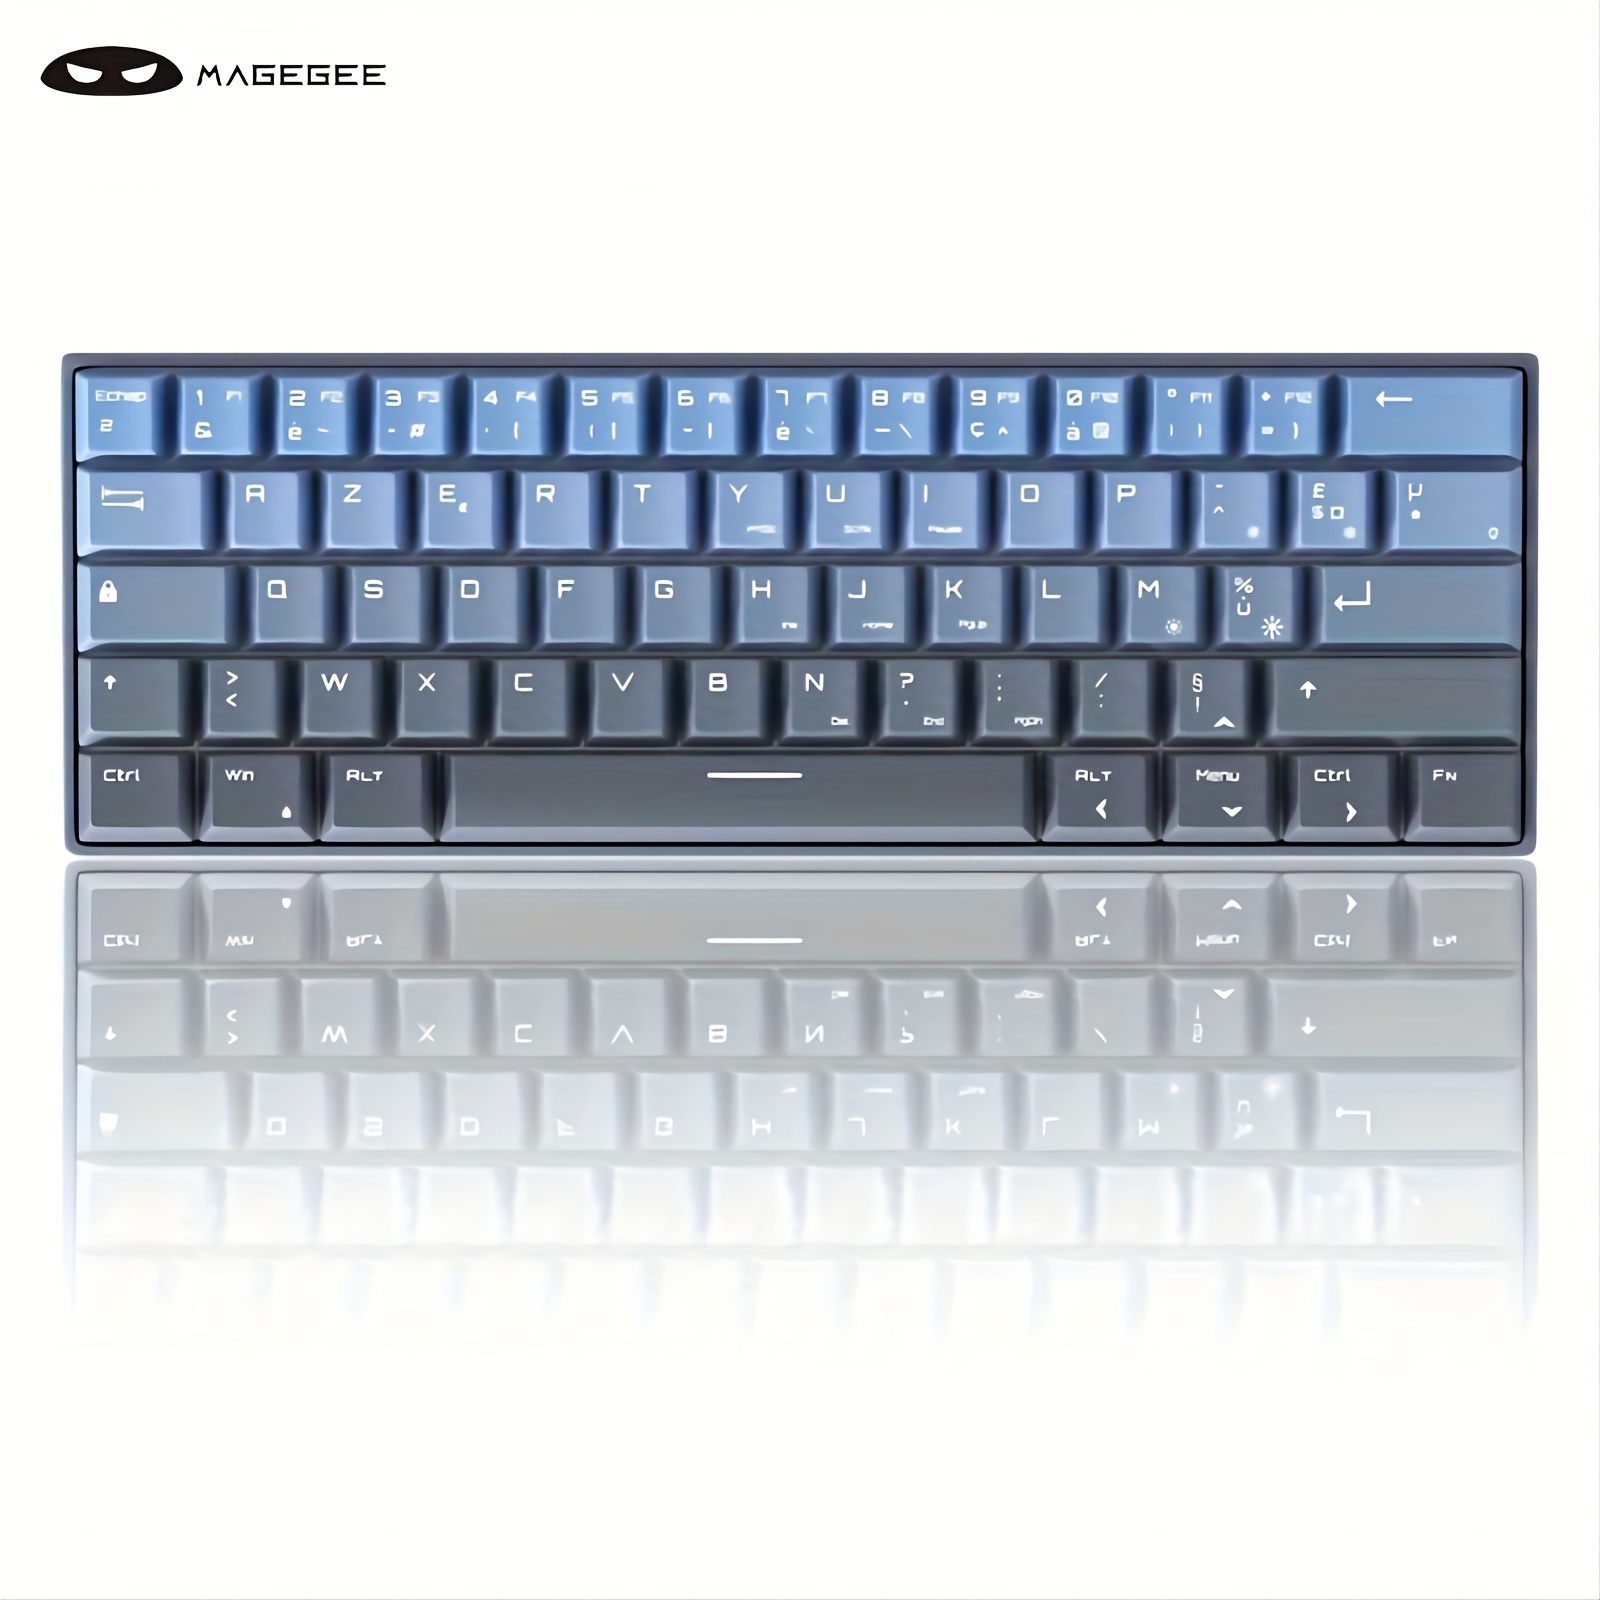 MageGee Star61 Mini - Clavier Gaming - Mécanique - 60